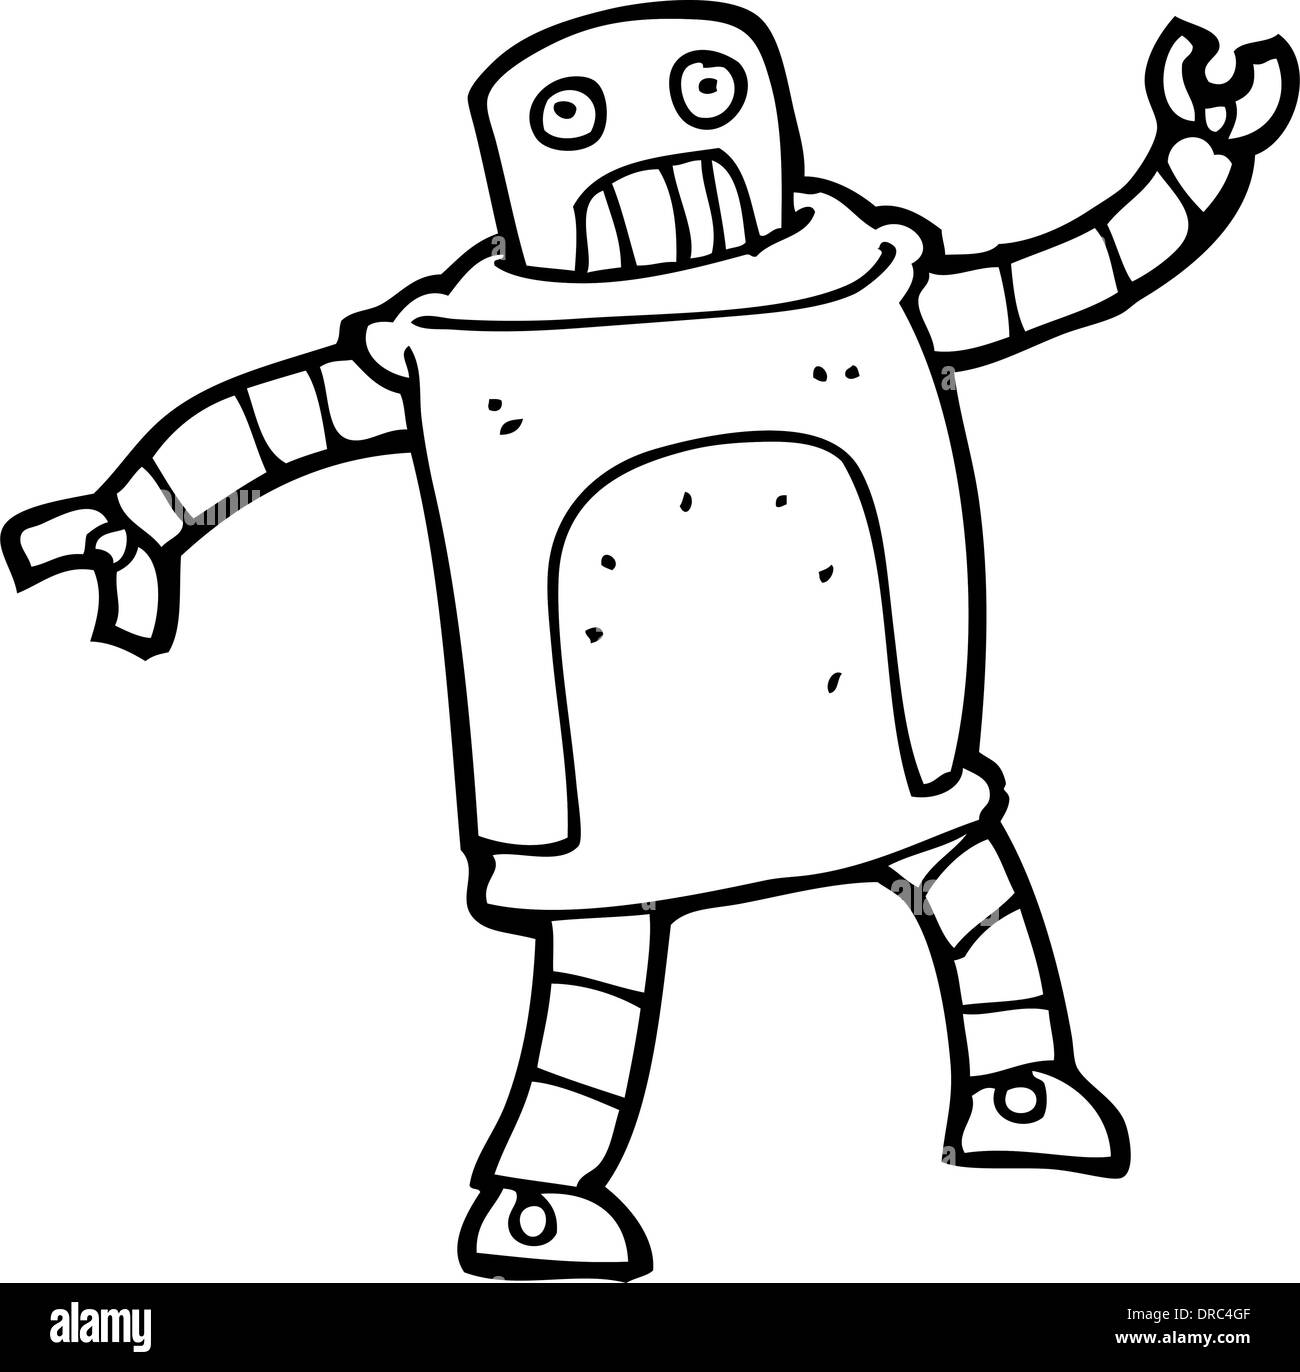 Robot dancing Black and White Stock Photos & Images - Alamy